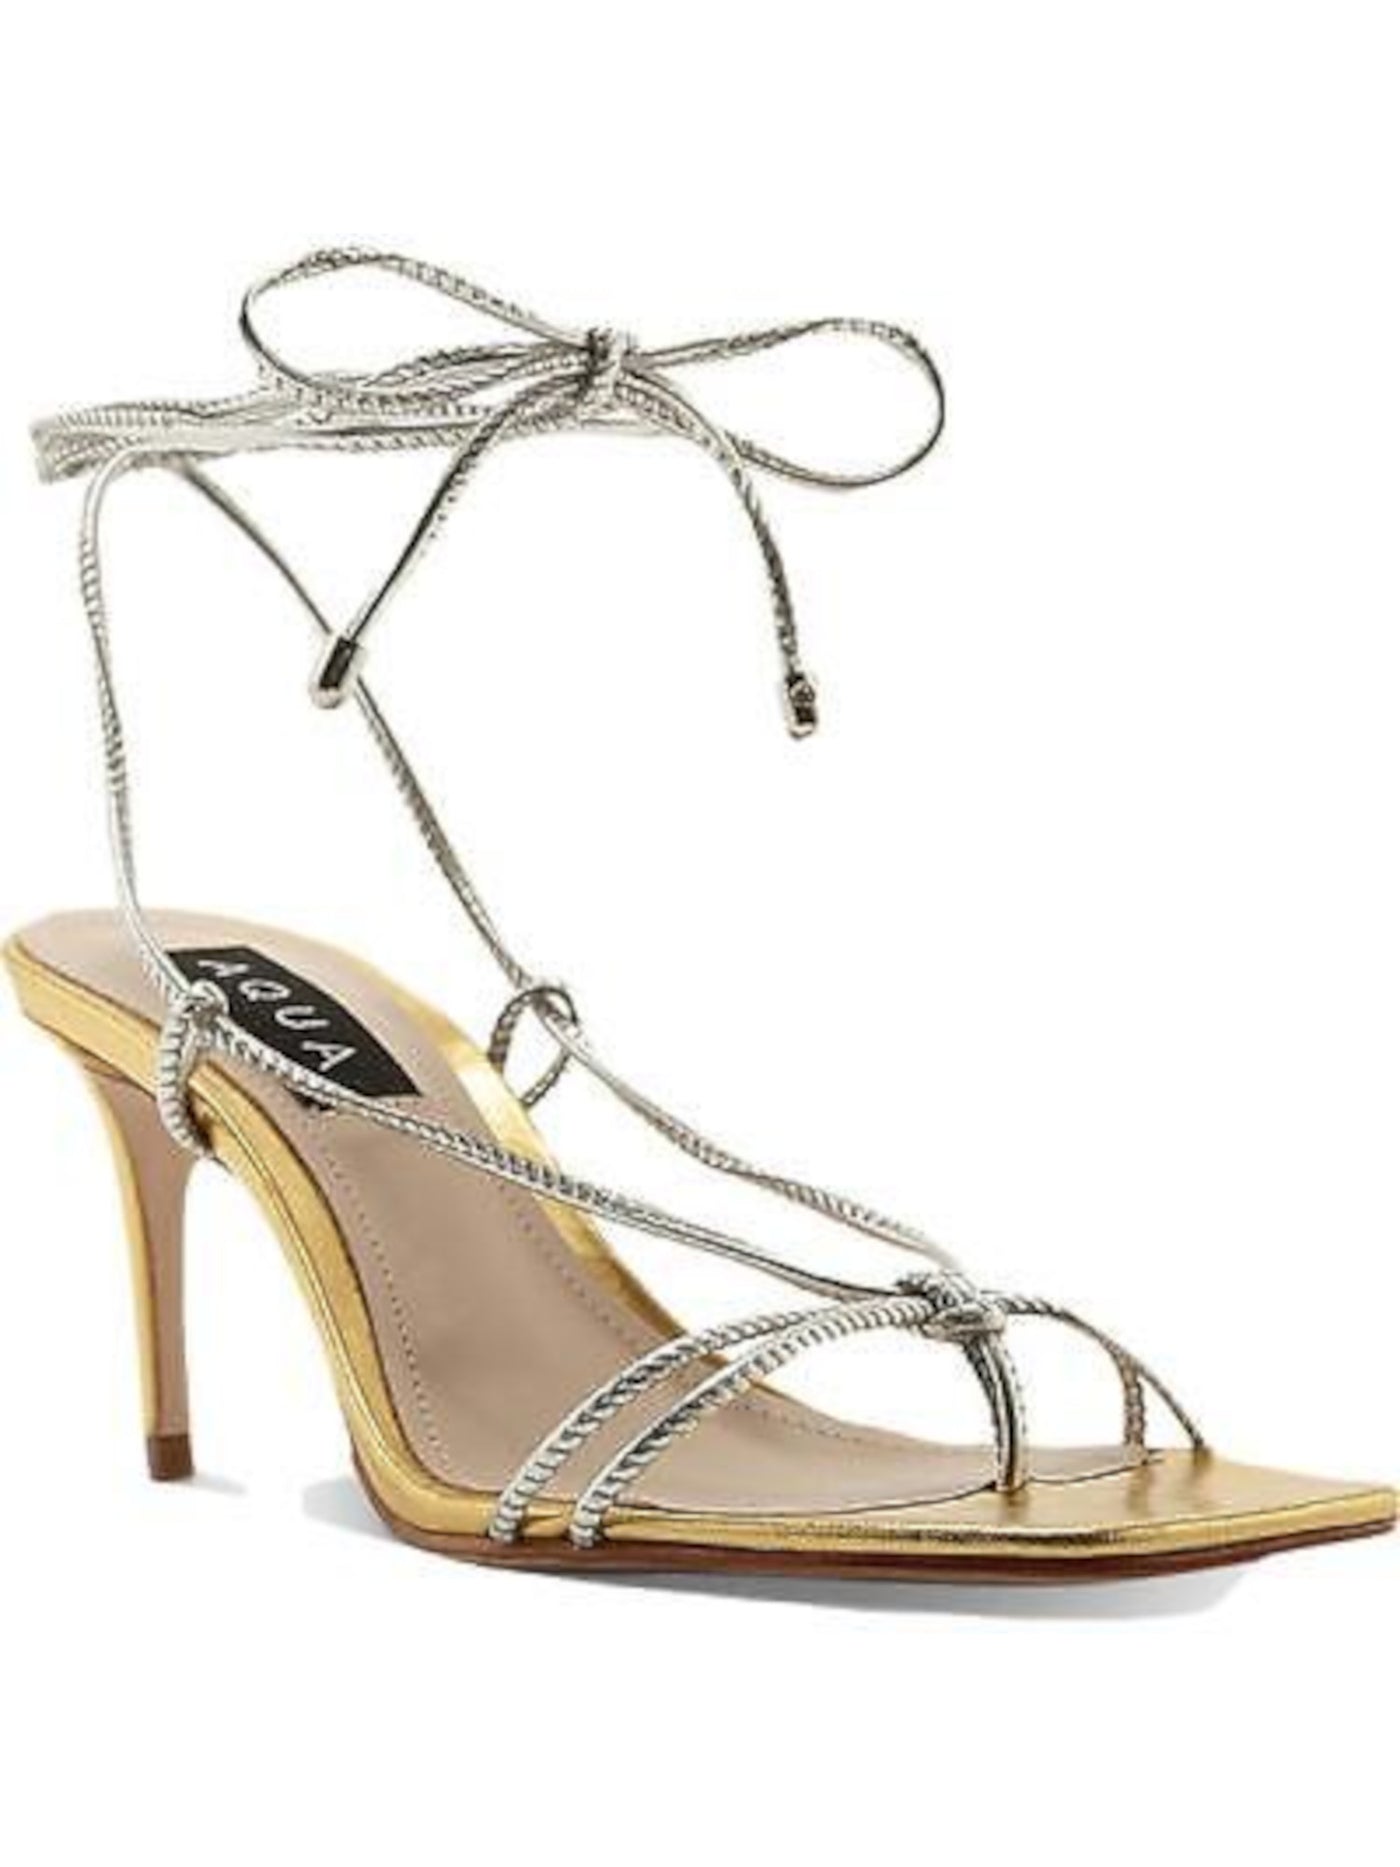 AQUA Womens Gold Strappy Comfort Dirlene Square Toe Stiletto Lace-Up Leather Dress Heeled Thong Sandals 9